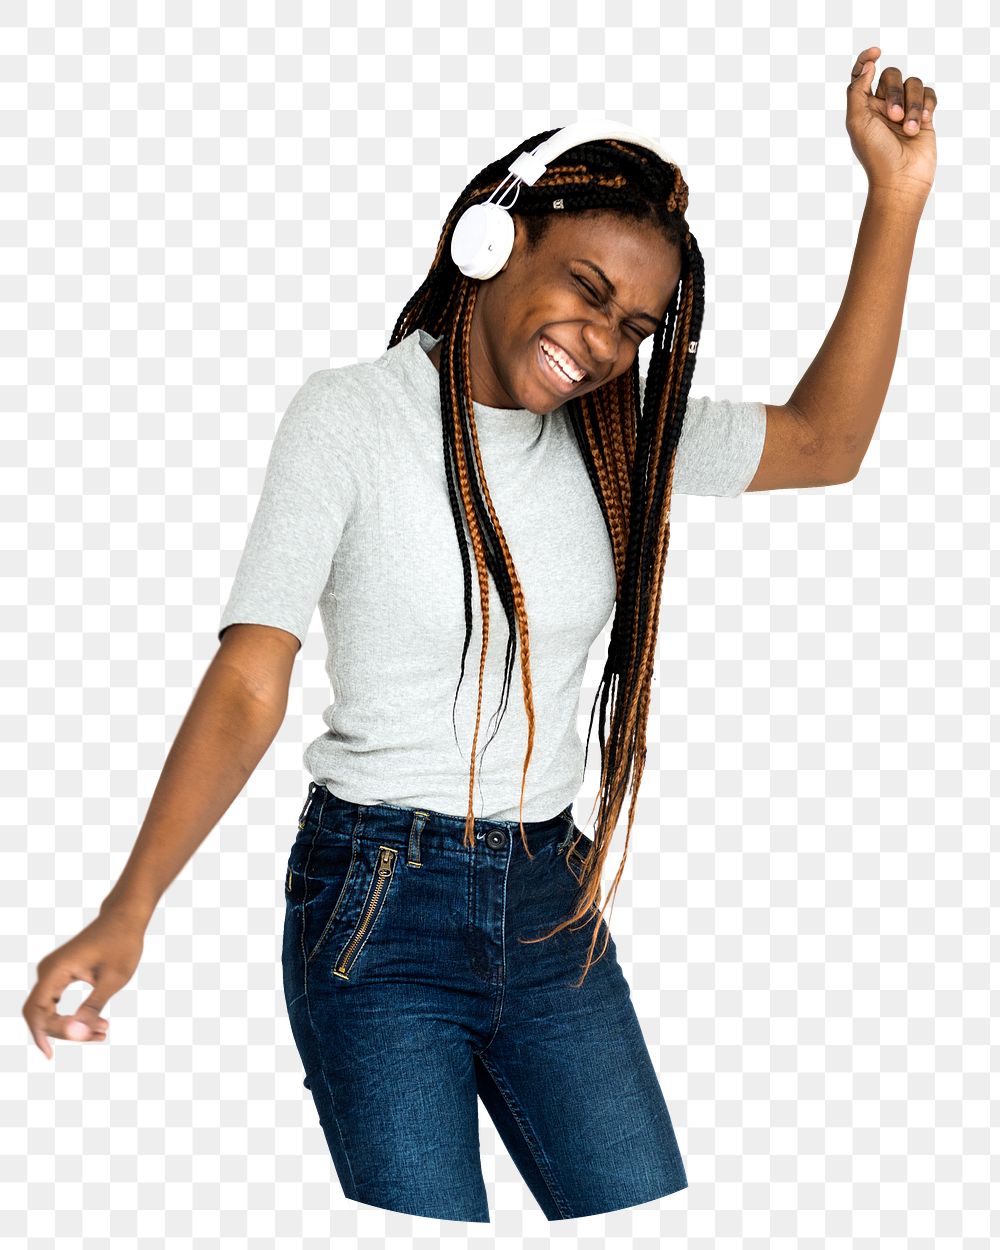 Woman listening to music png sticker, transparent background